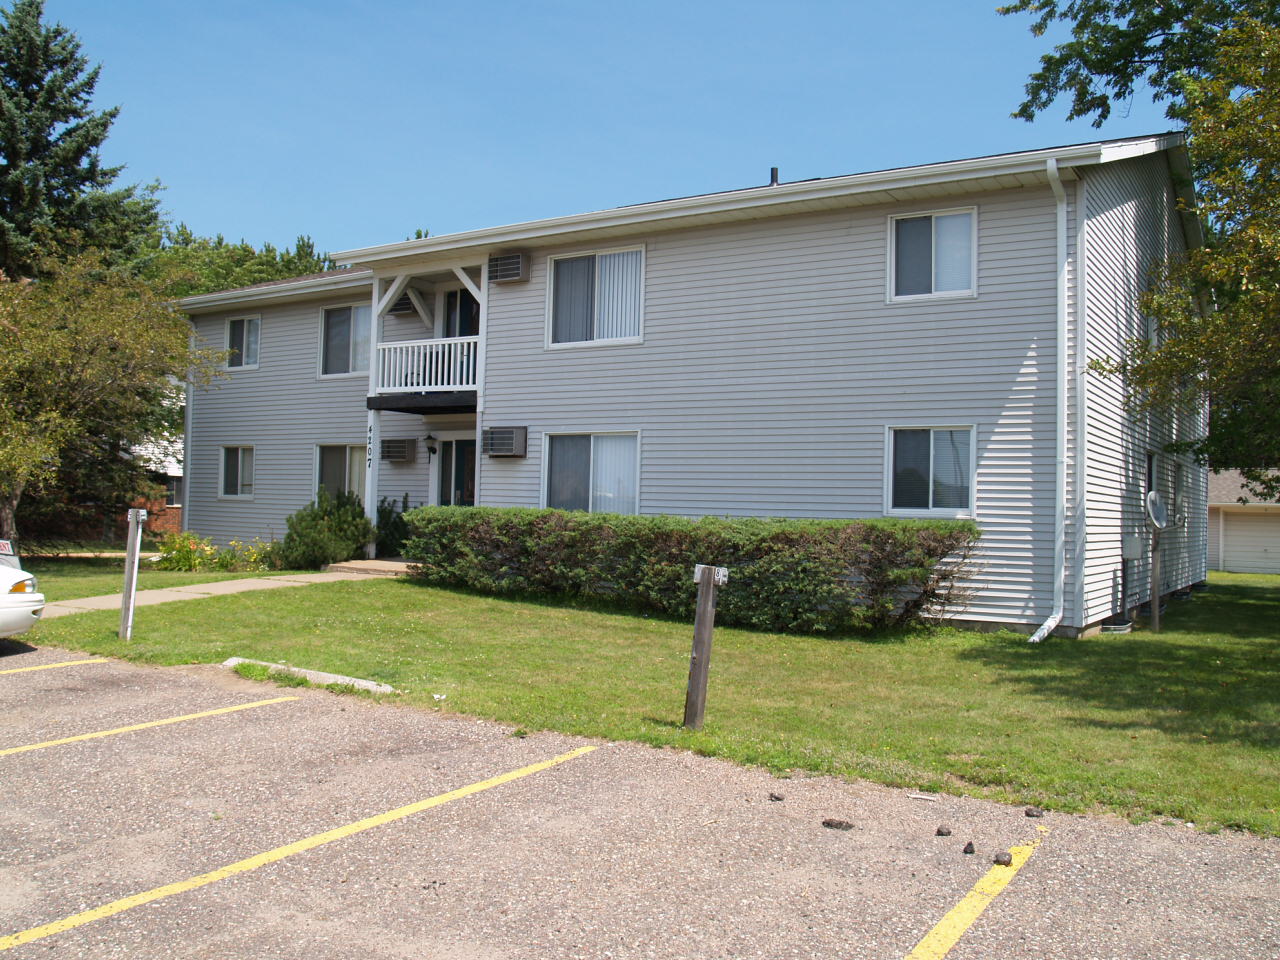 Residential home available for rent in Mosinee, WI